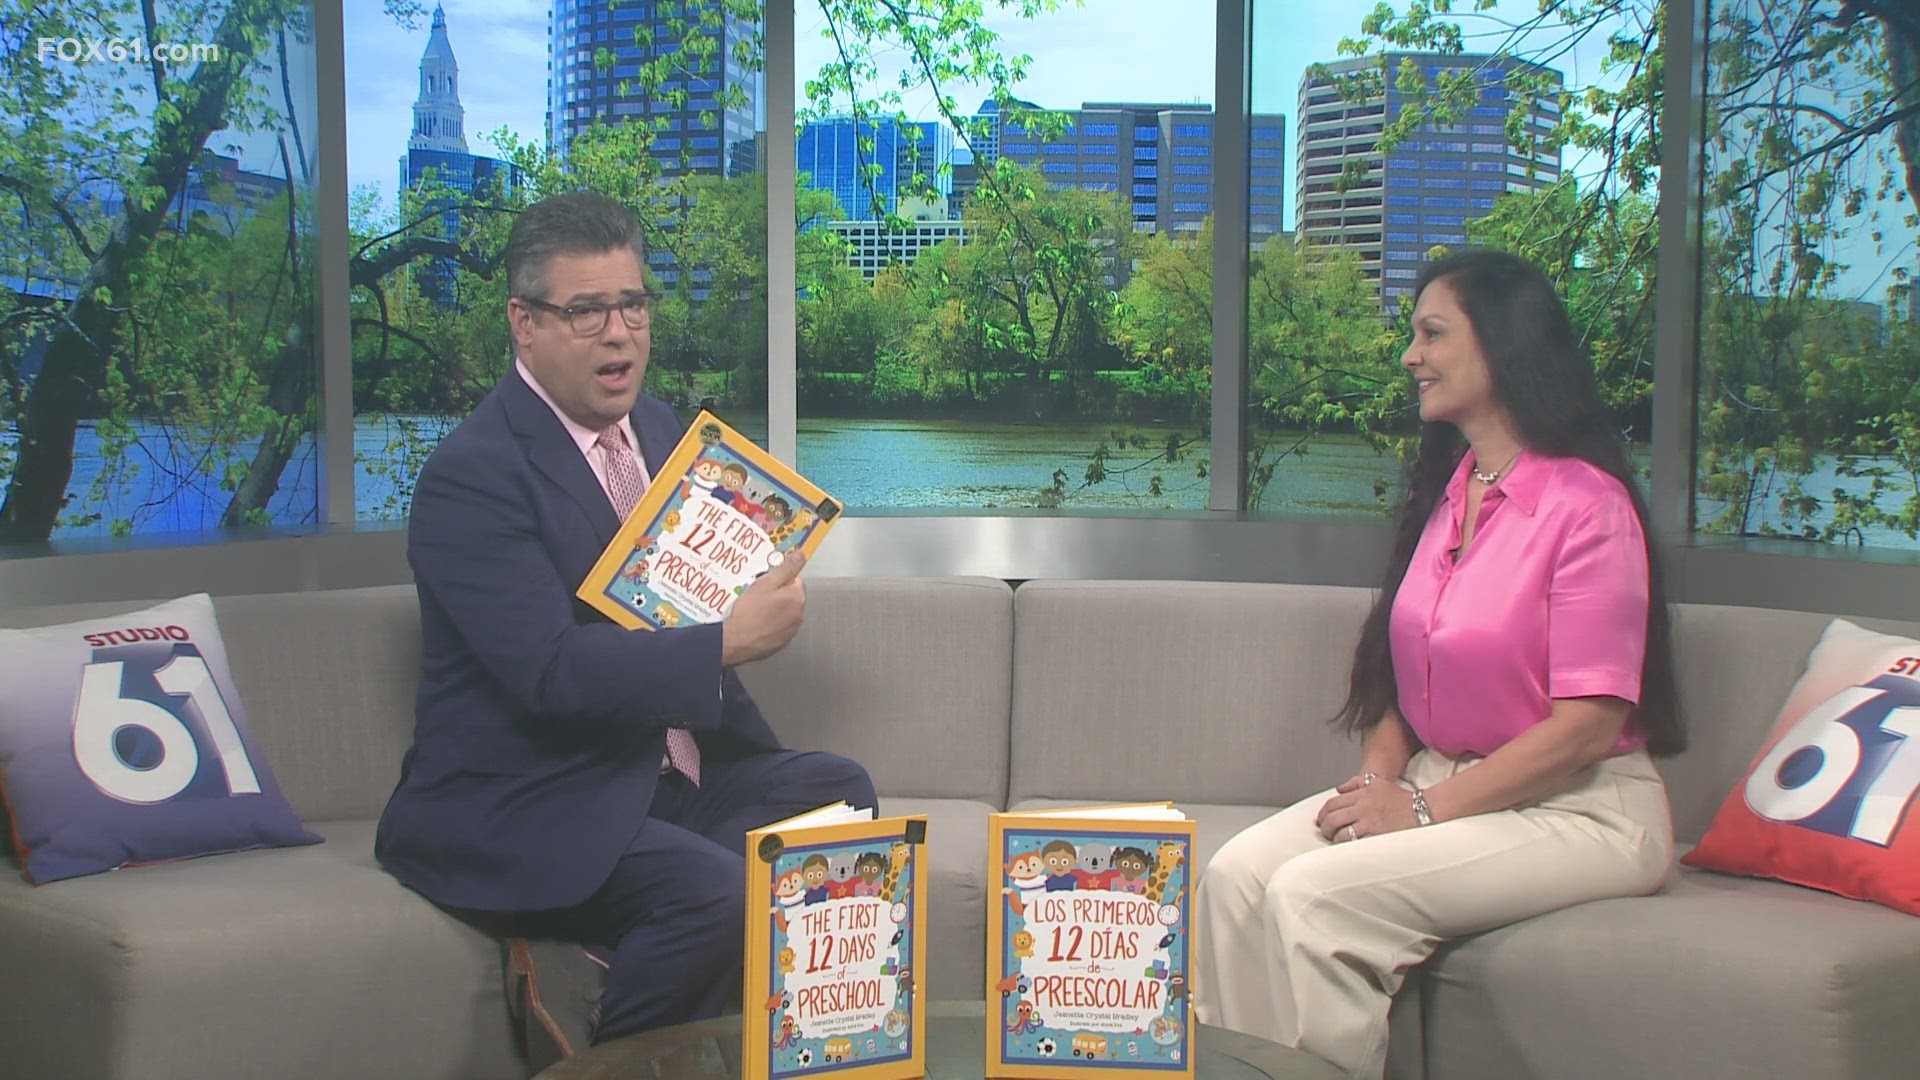 Jeanette Crystal Bradley discusses her new award-winning children's book "The First 12 Days of Preschool"